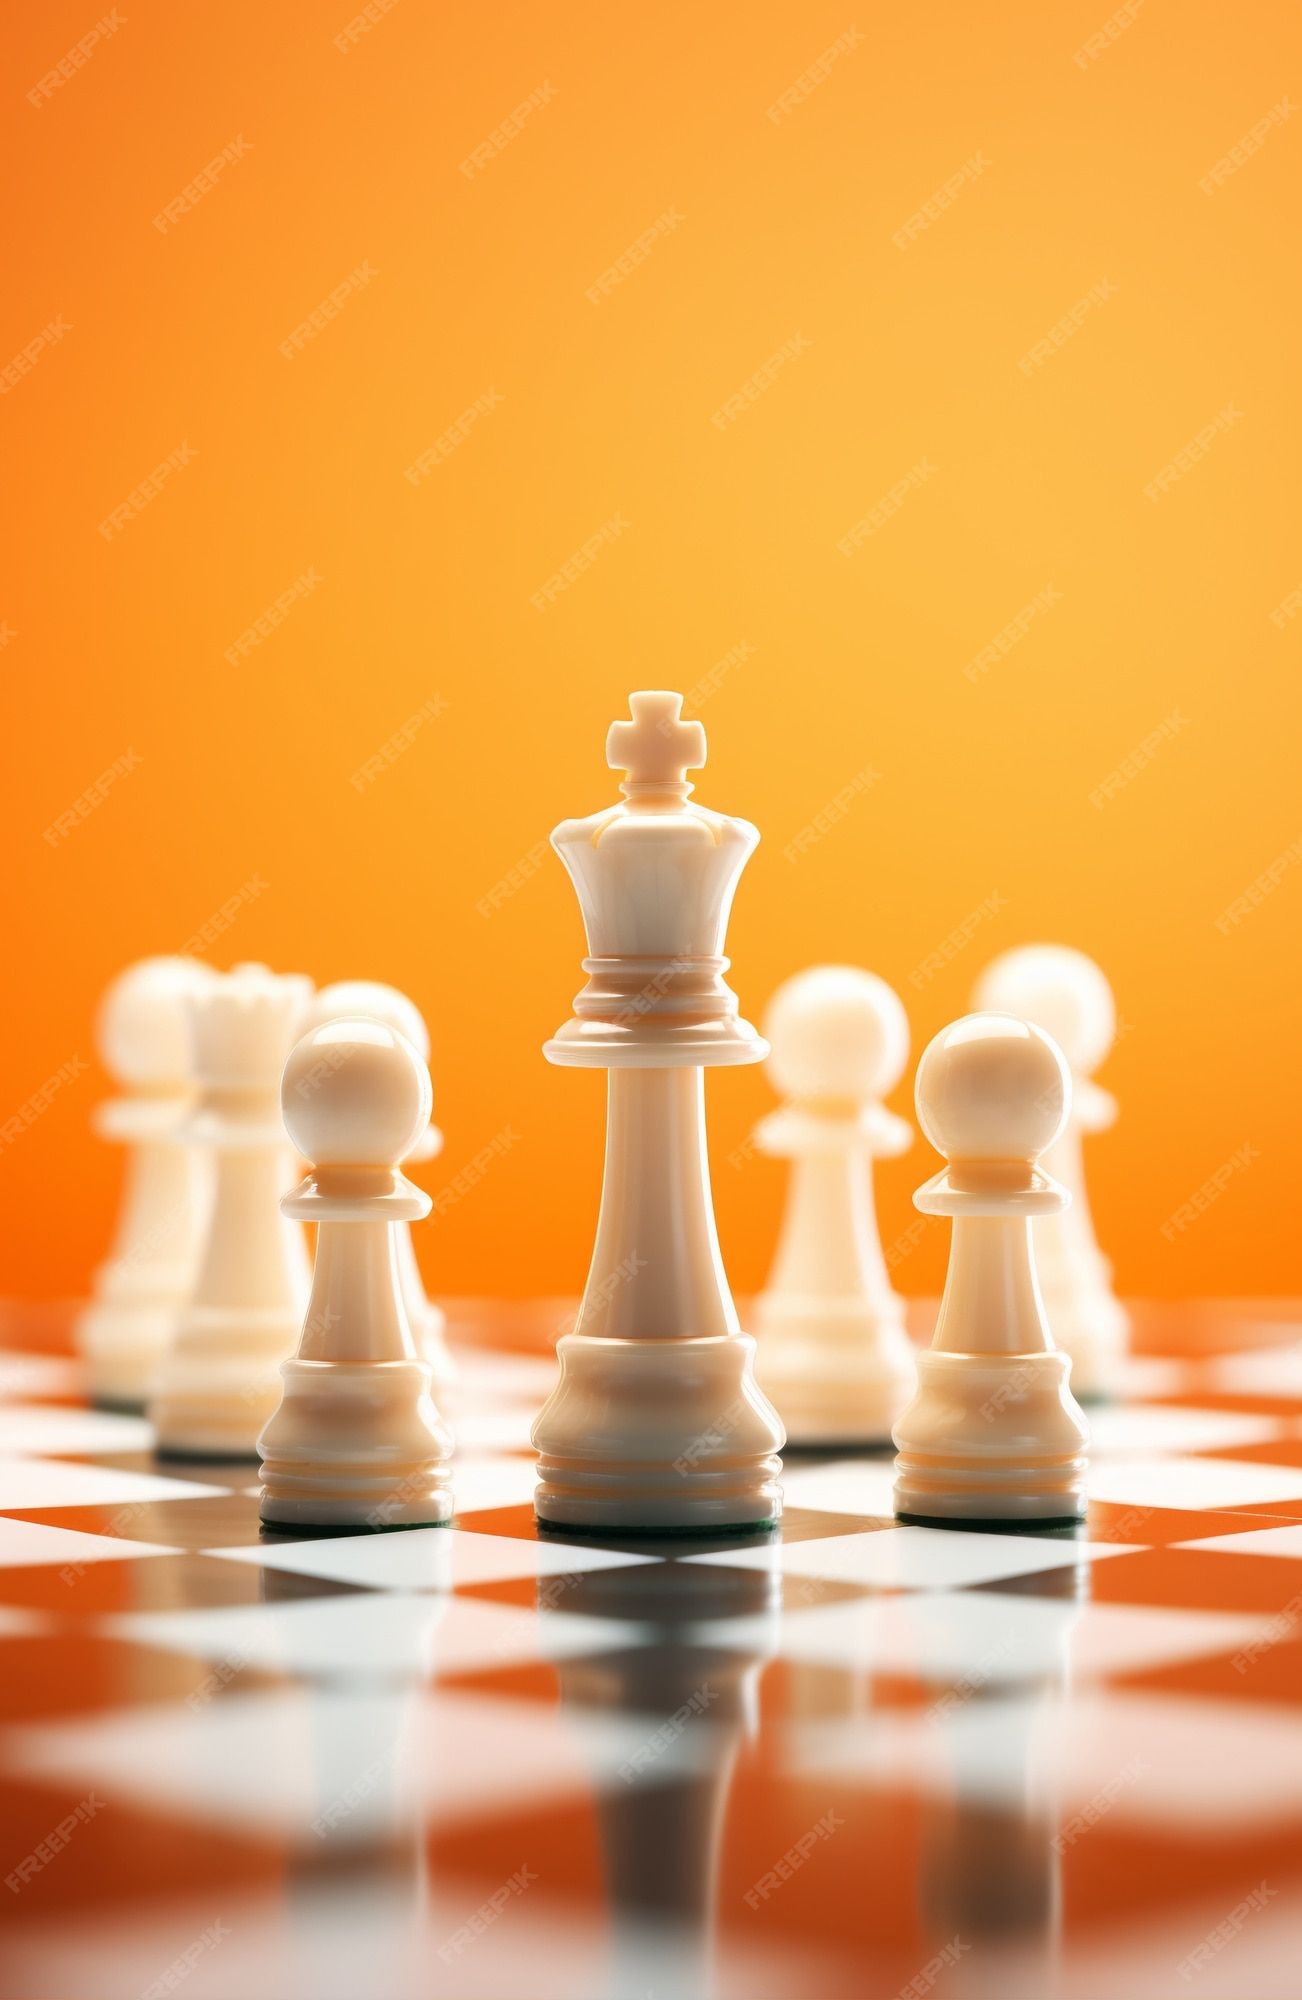 Giant Chess Board Image